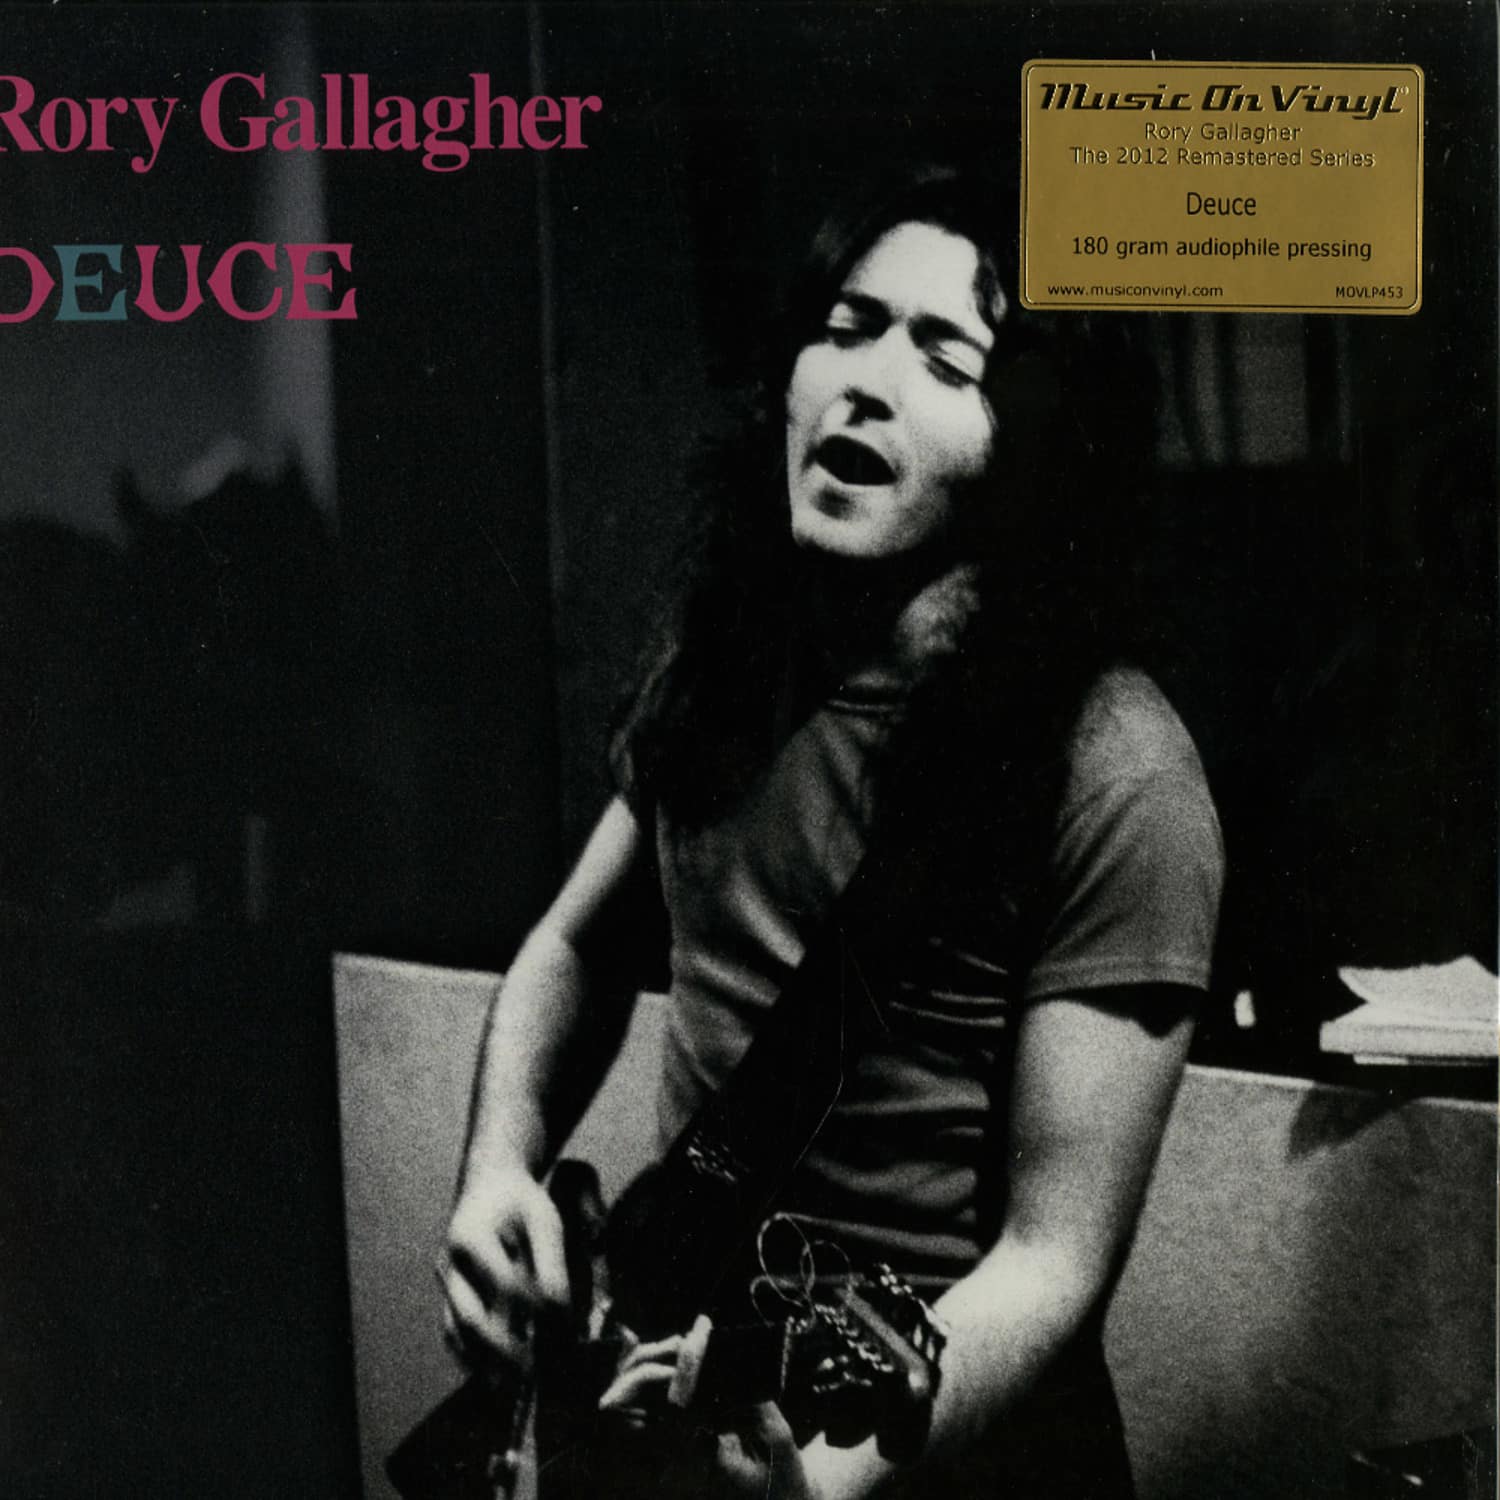 Rory Gallagher - DEUCE 